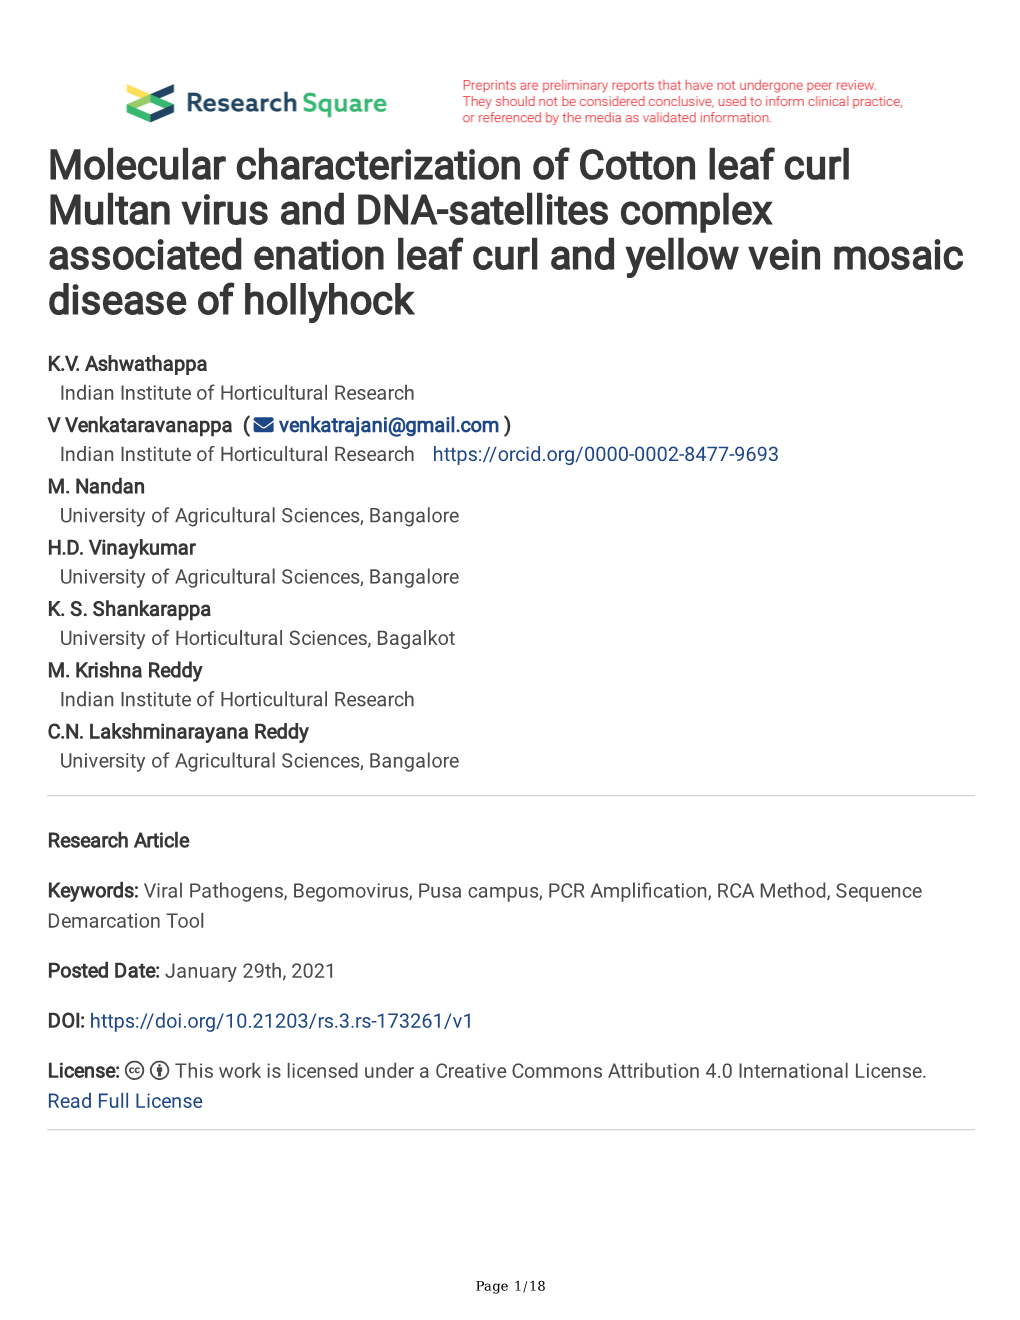 Molecular Characterization of Cotton Leaf Curl Multan Virus and DNA-Satellites Complex Associated Enation Leaf Curl and Yellow Vein Mosaic Disease of Hollyhock